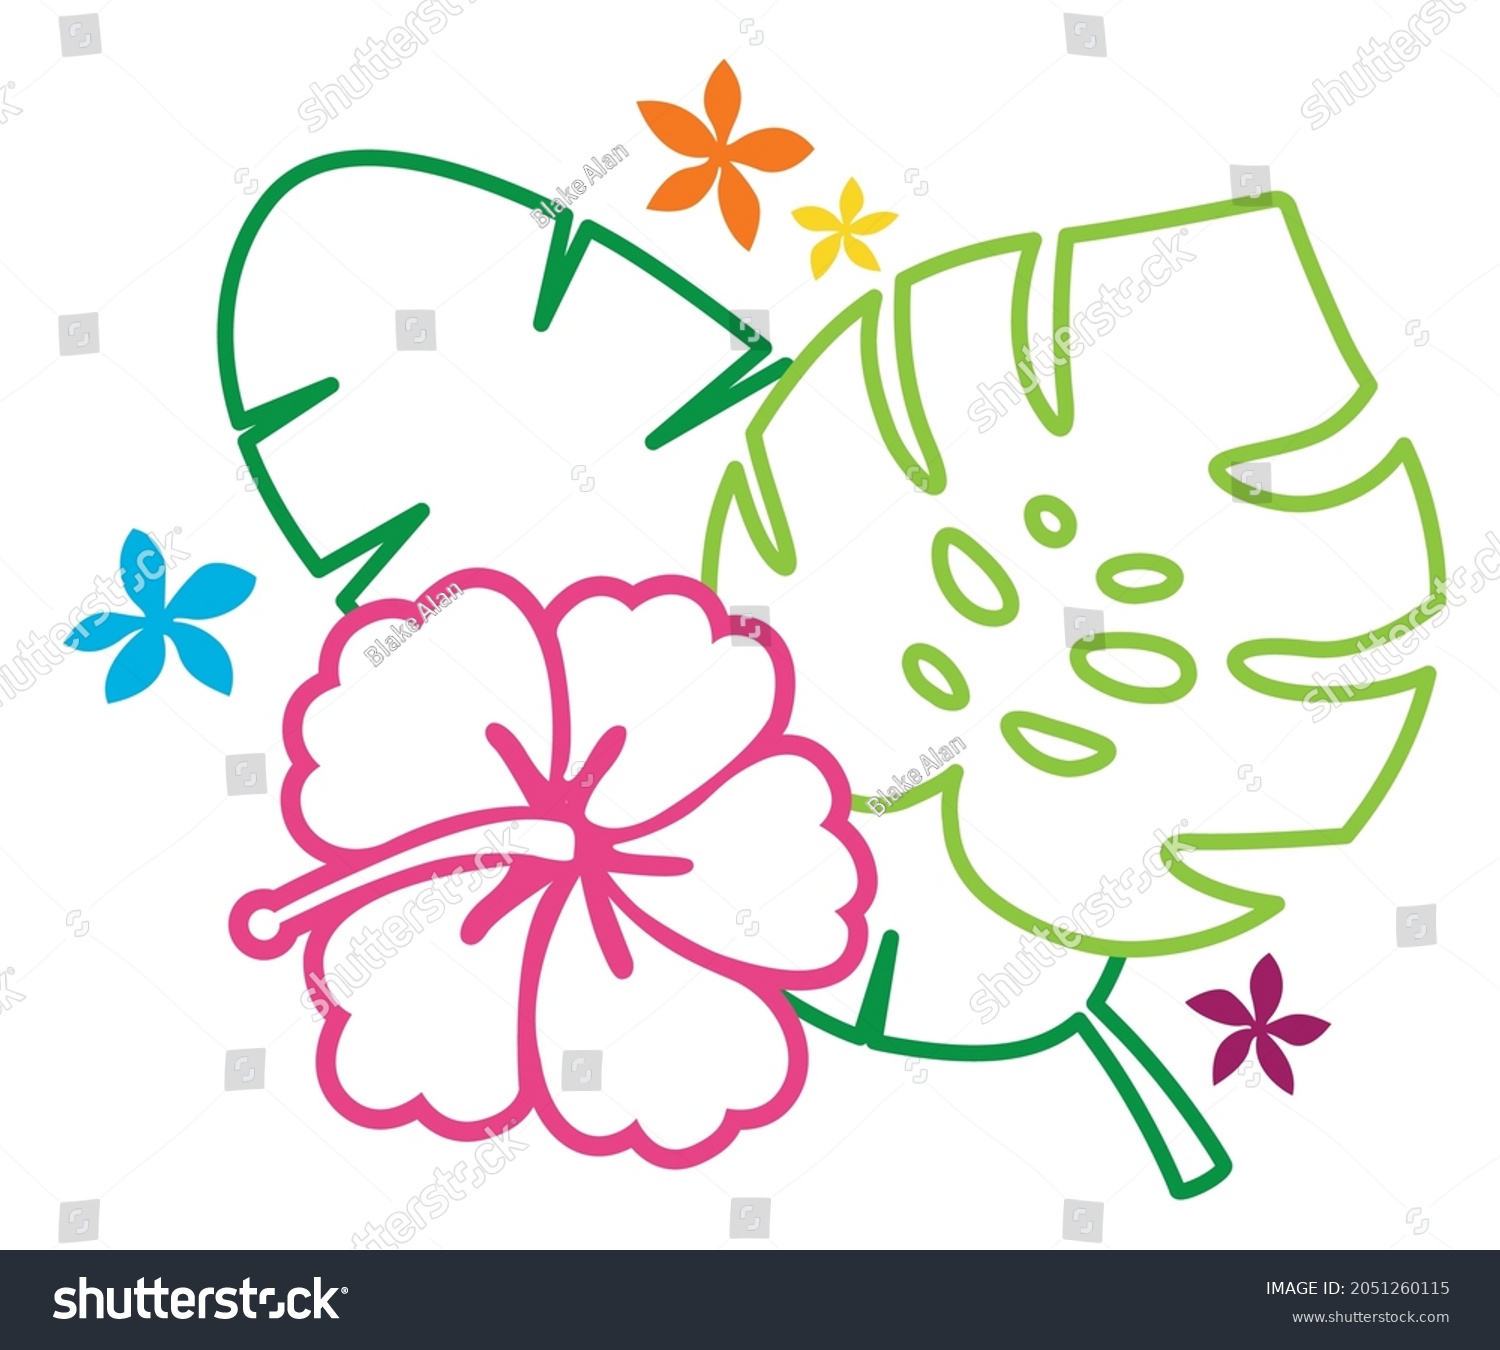 SVG of Tropical Foliage Outlines | Monstera, Banana Leaf and Hibiscus Flower | Neon Tropical Design Elements | Floral Shapes | Island Clipart svg